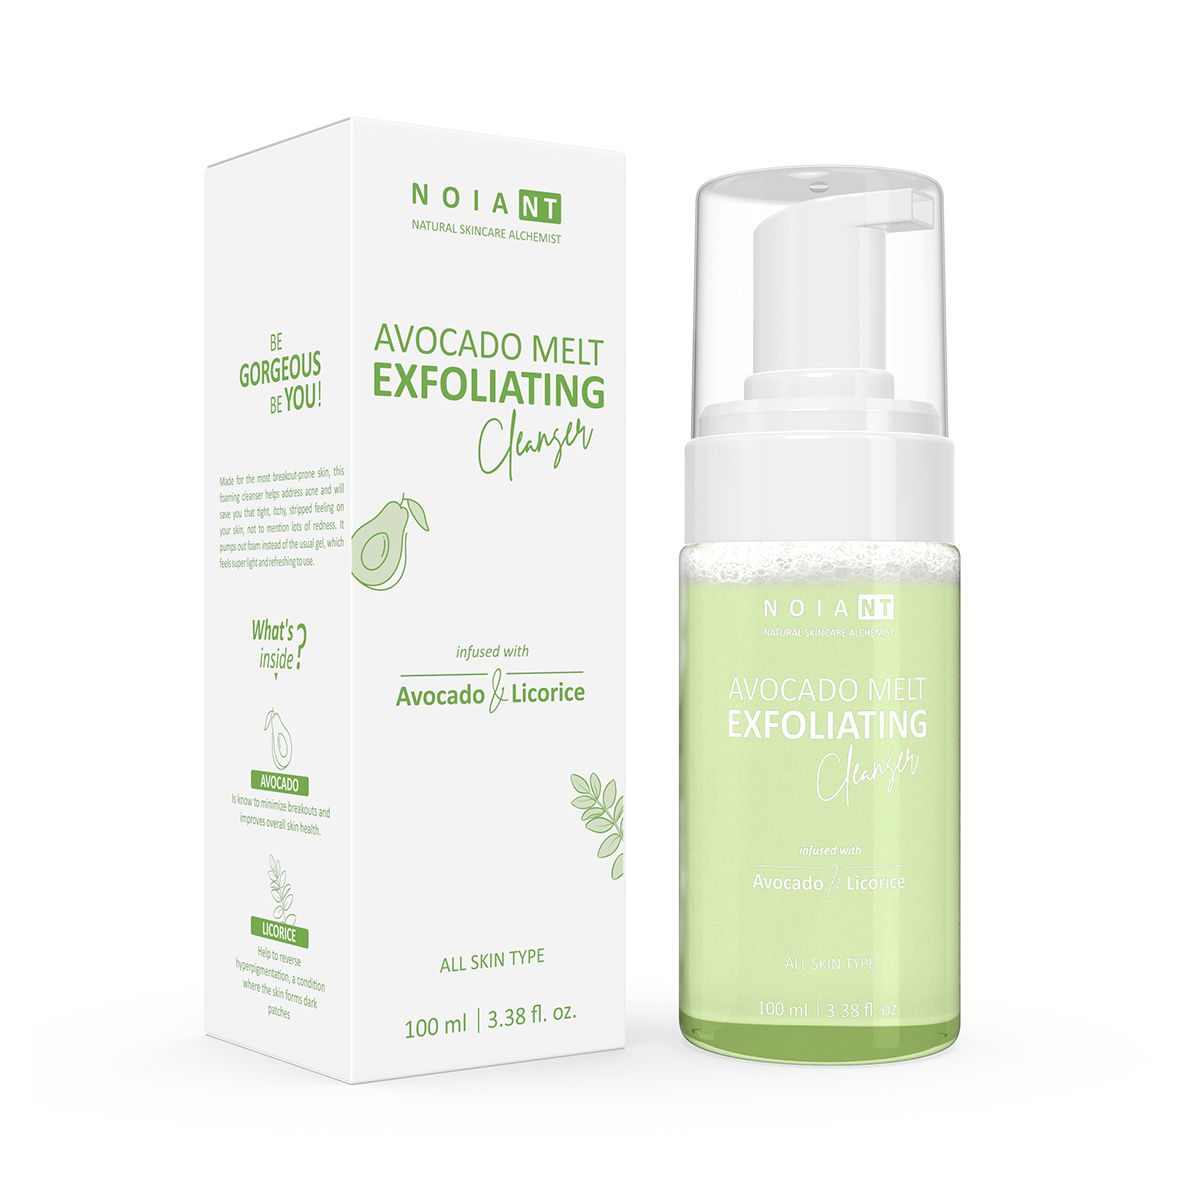 Buy Noiant Avocado & Licorice Melt Exfoliating Foaming Cleanser | Daily Face Cleanser, Removes Oil, Deep Cleansing | For Normal to Oily skin - 100ml - Purplle